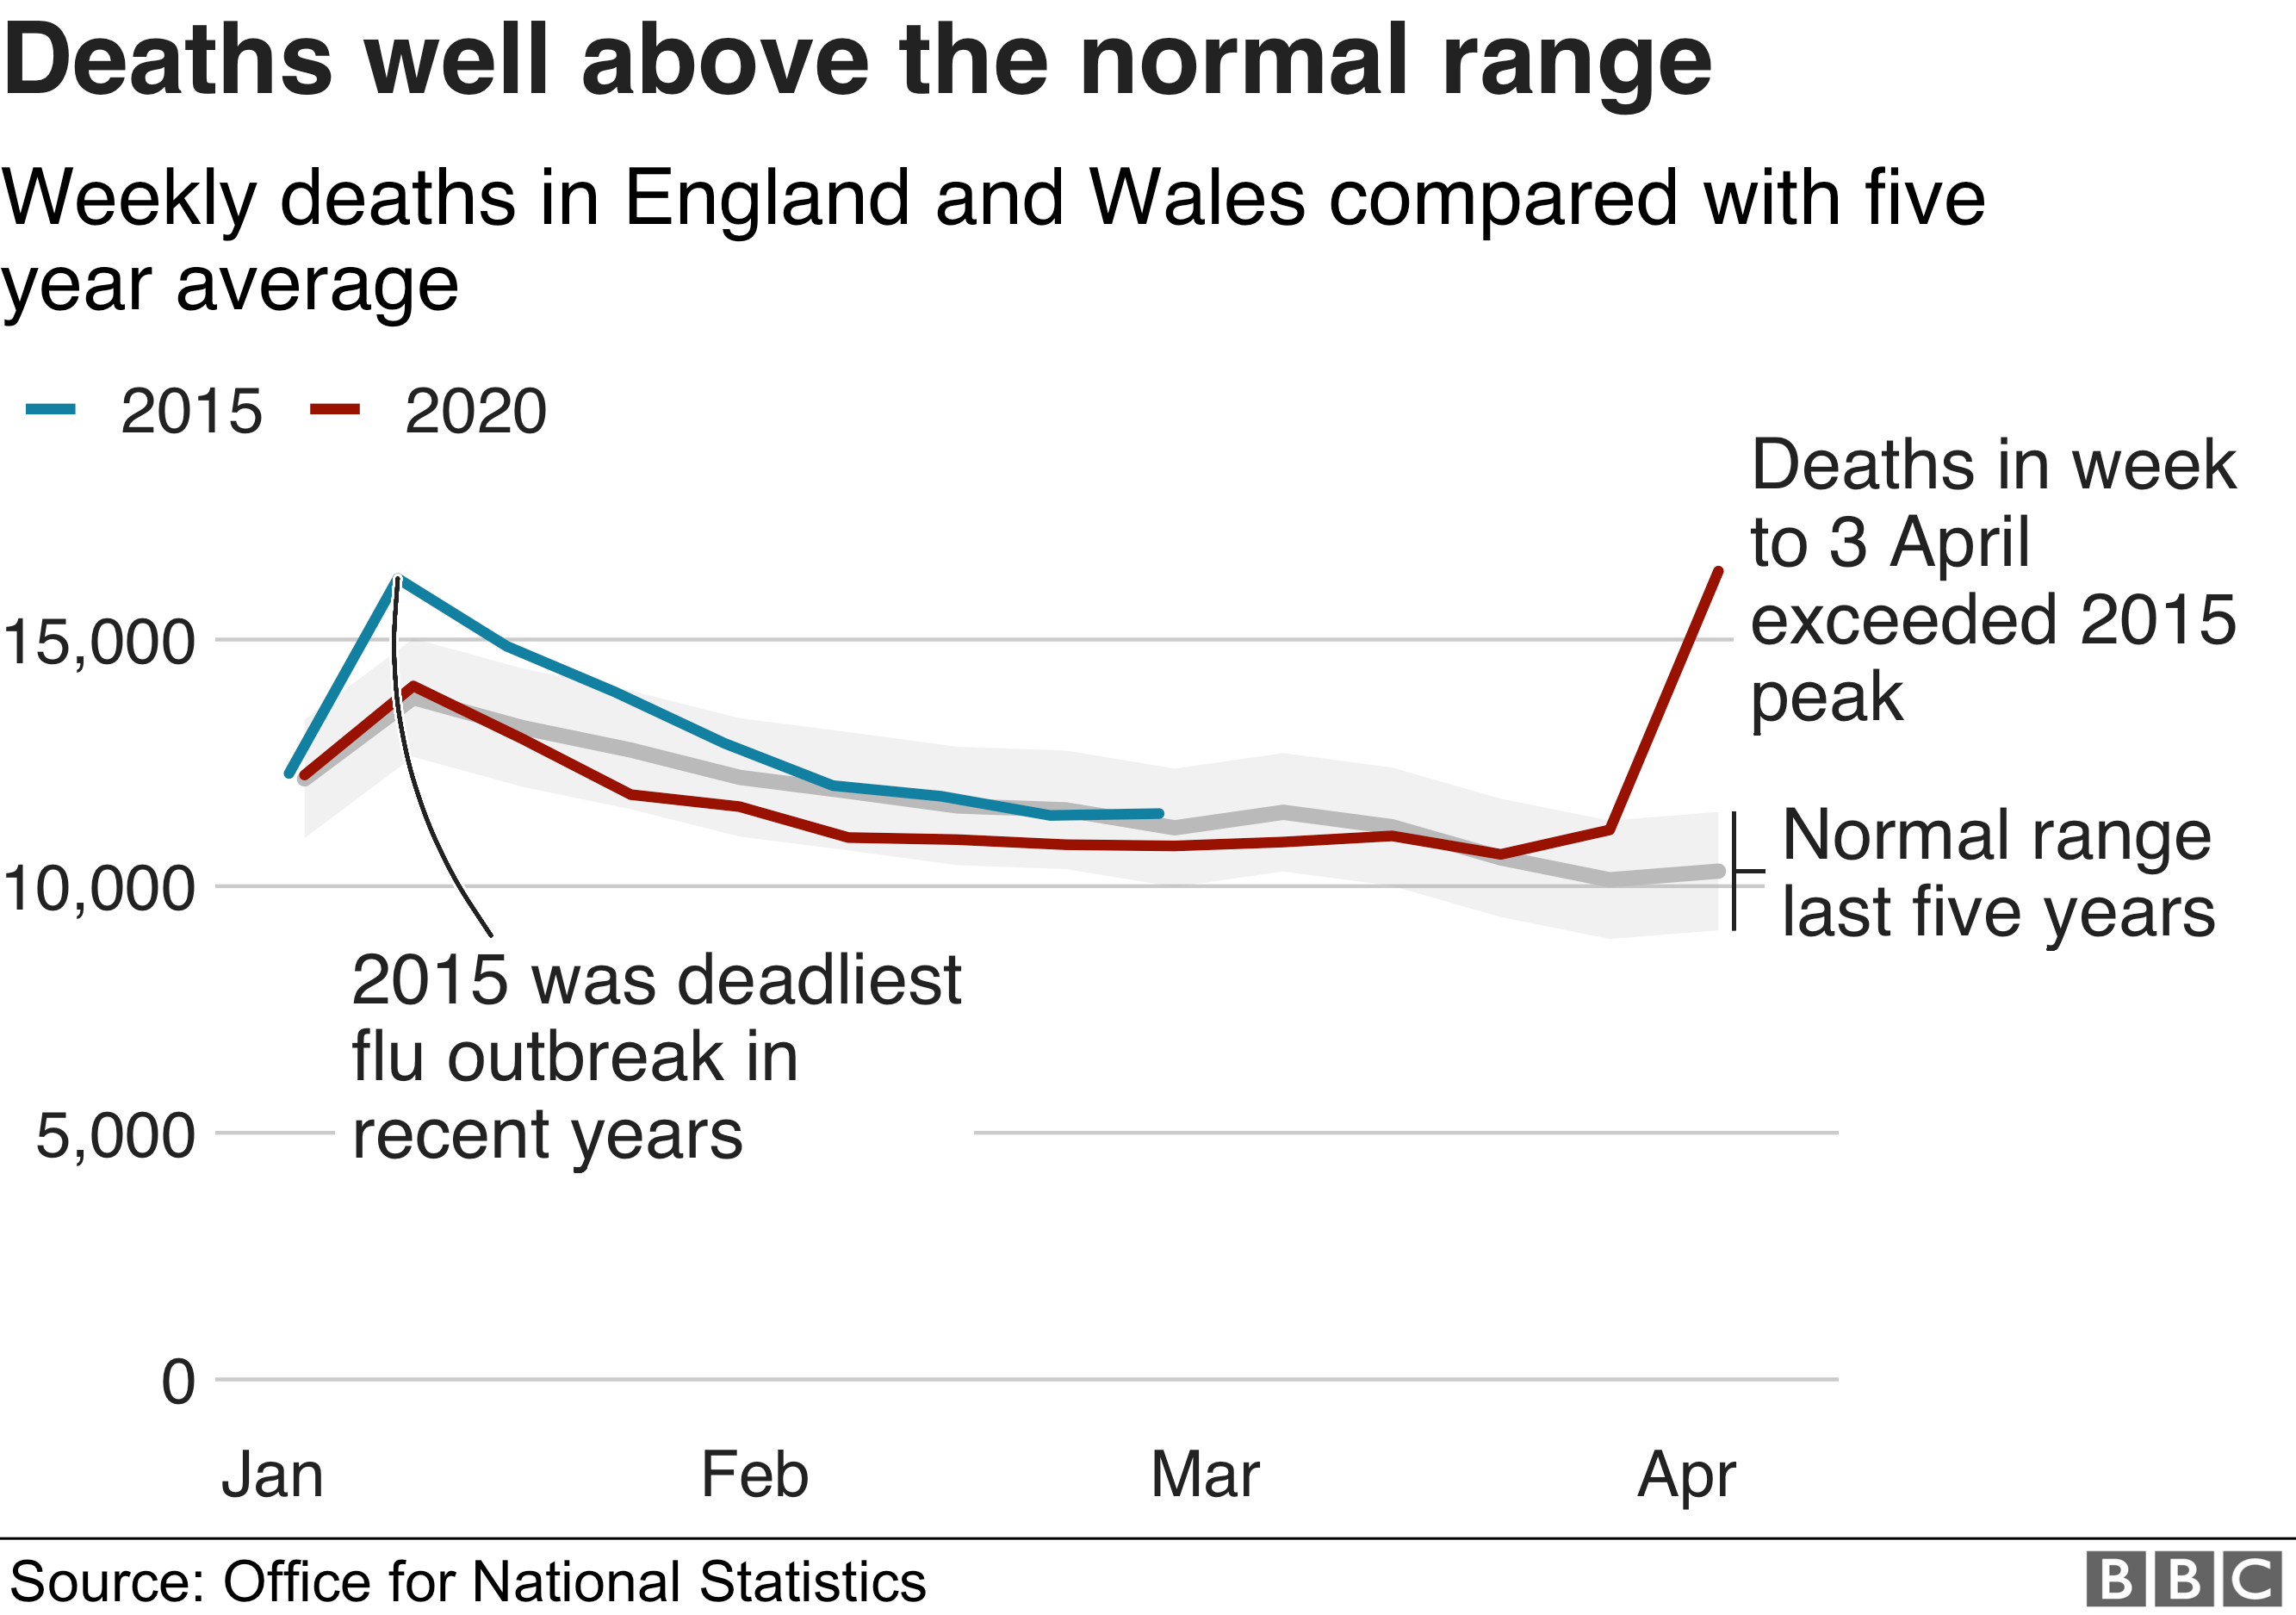 deaths well above normal range - line chart